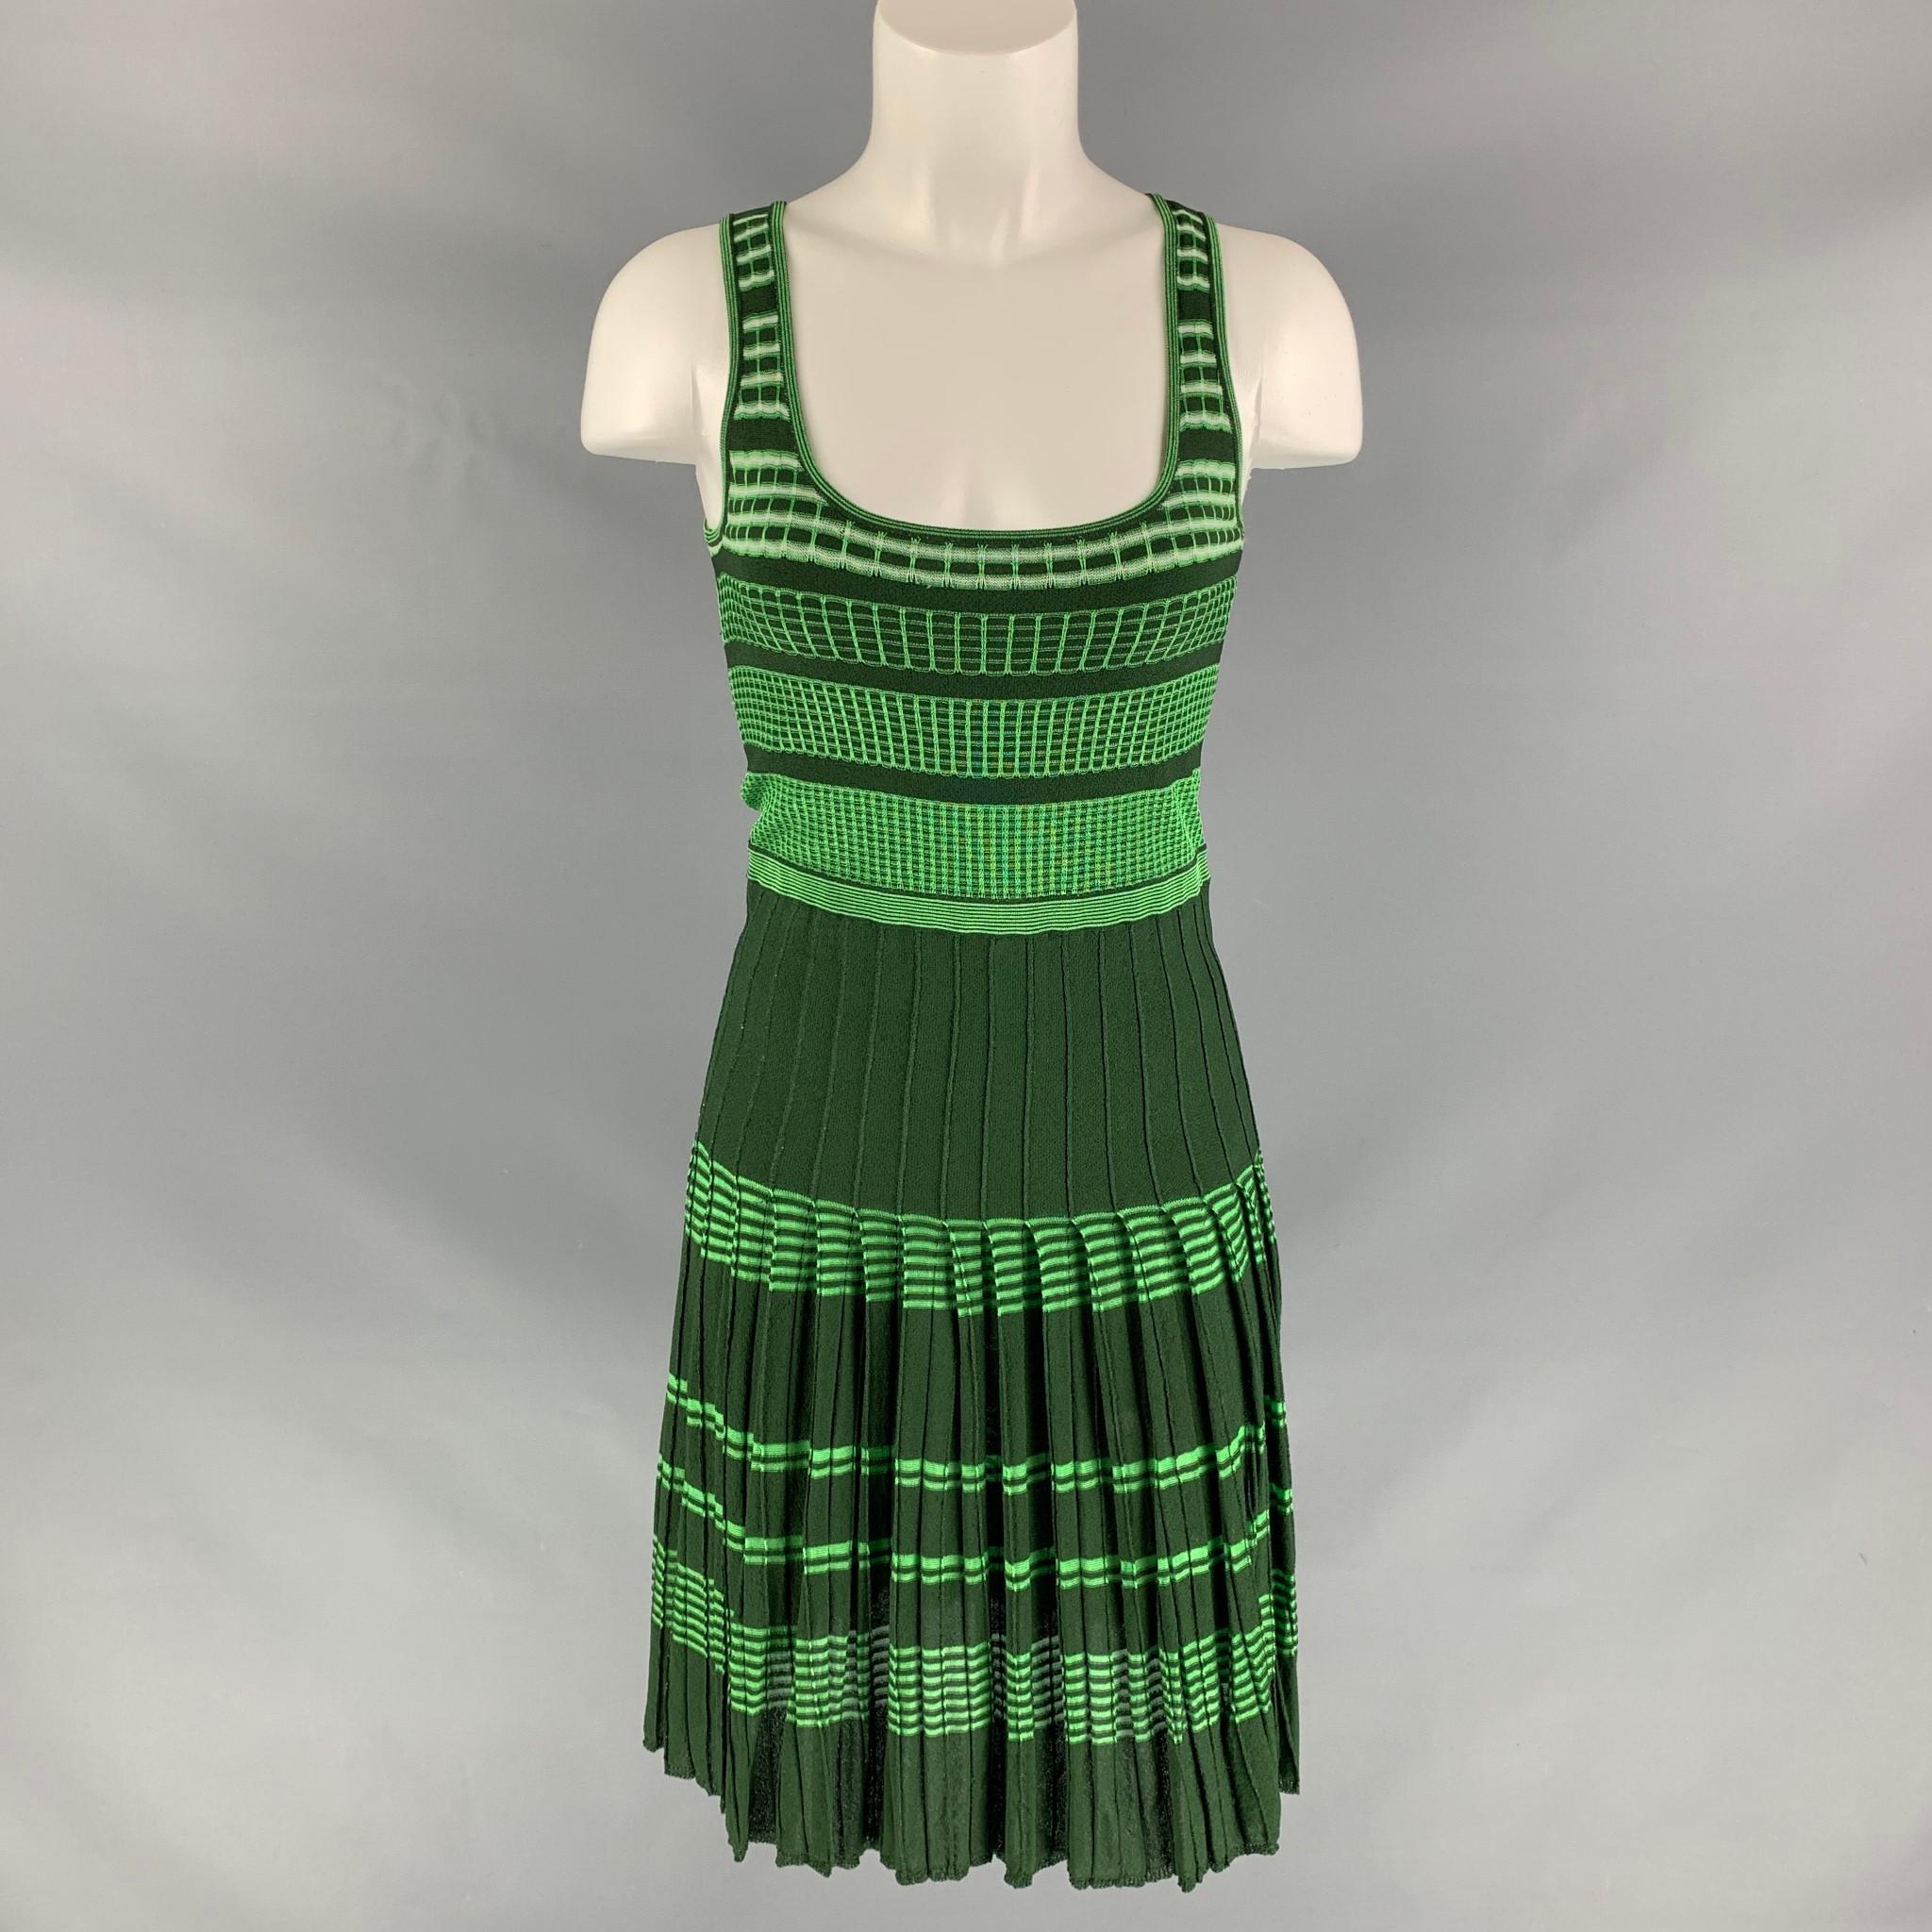 ZAC POSEN sleeveless A-line, knee level dress comes in green knitted viscose blend fabric, scoop neck and pleated skirt.

Very Good Pre-Owned Condition.
Marked: S

Measurements:

Shoulder: 10.5 in
Bust: 29 in
Waist: 27 in
Hip: 29 in
Length: 37 in 